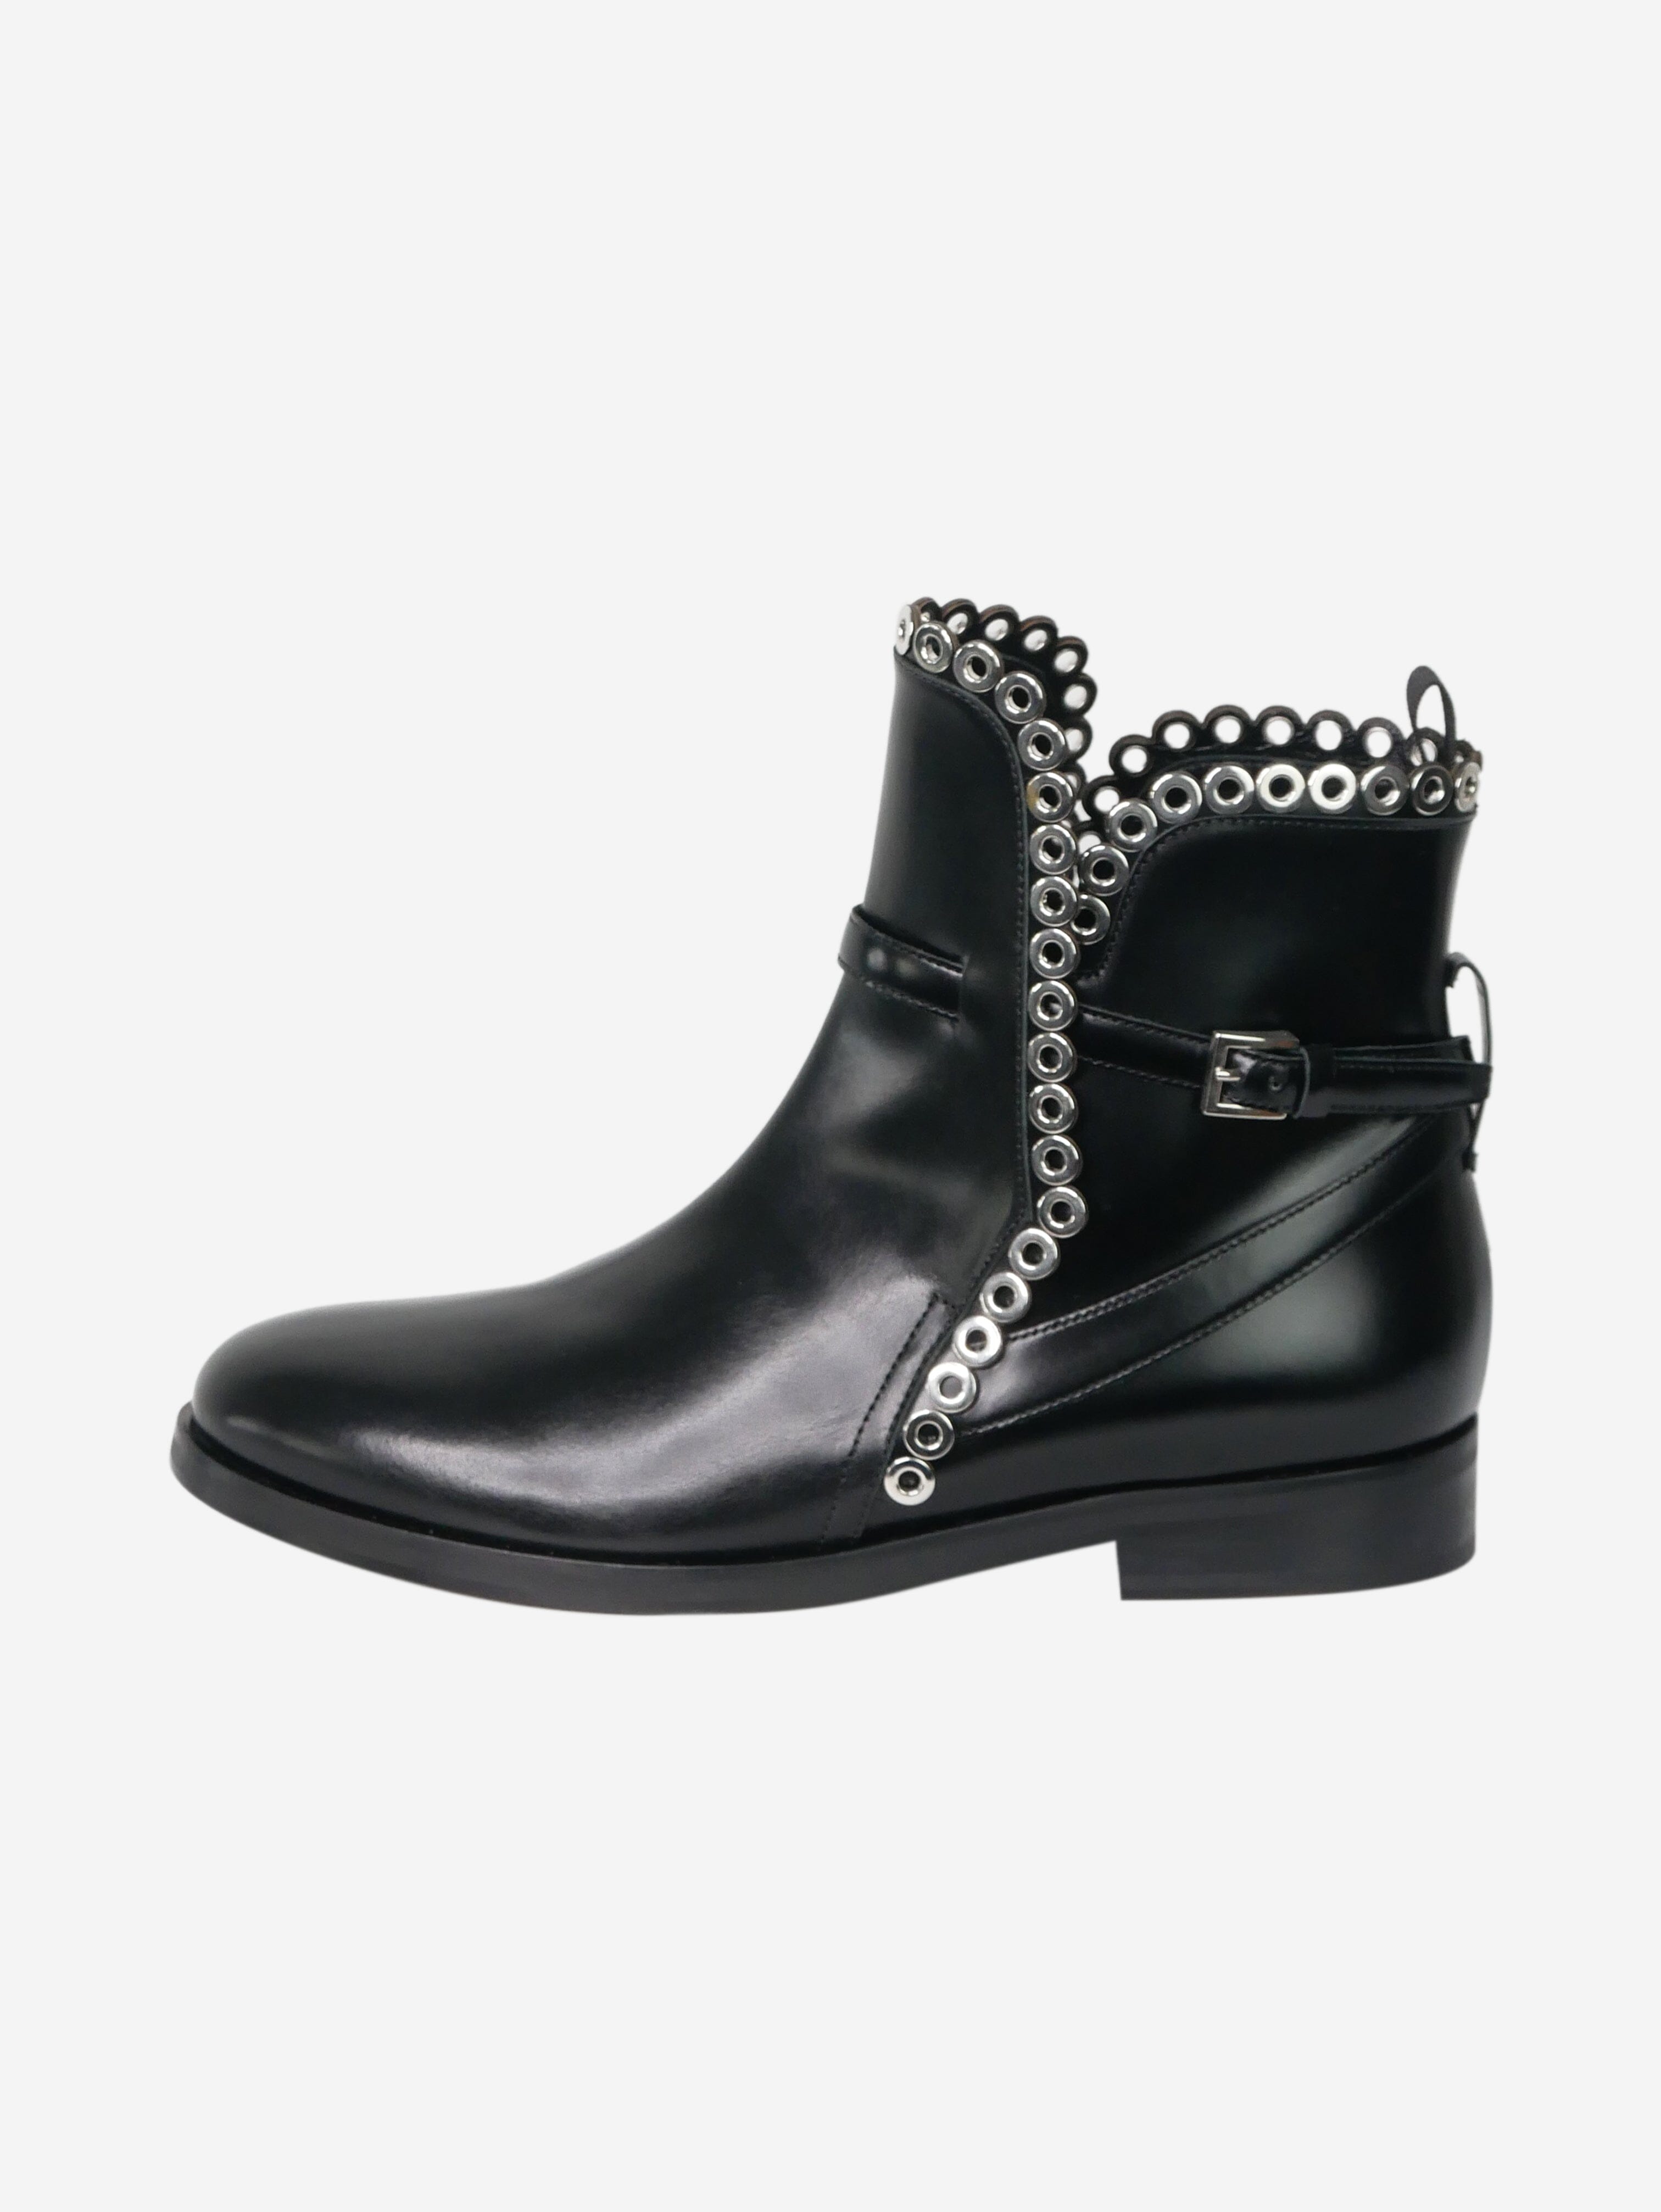 Chanel pre-owned black leather ankle boots